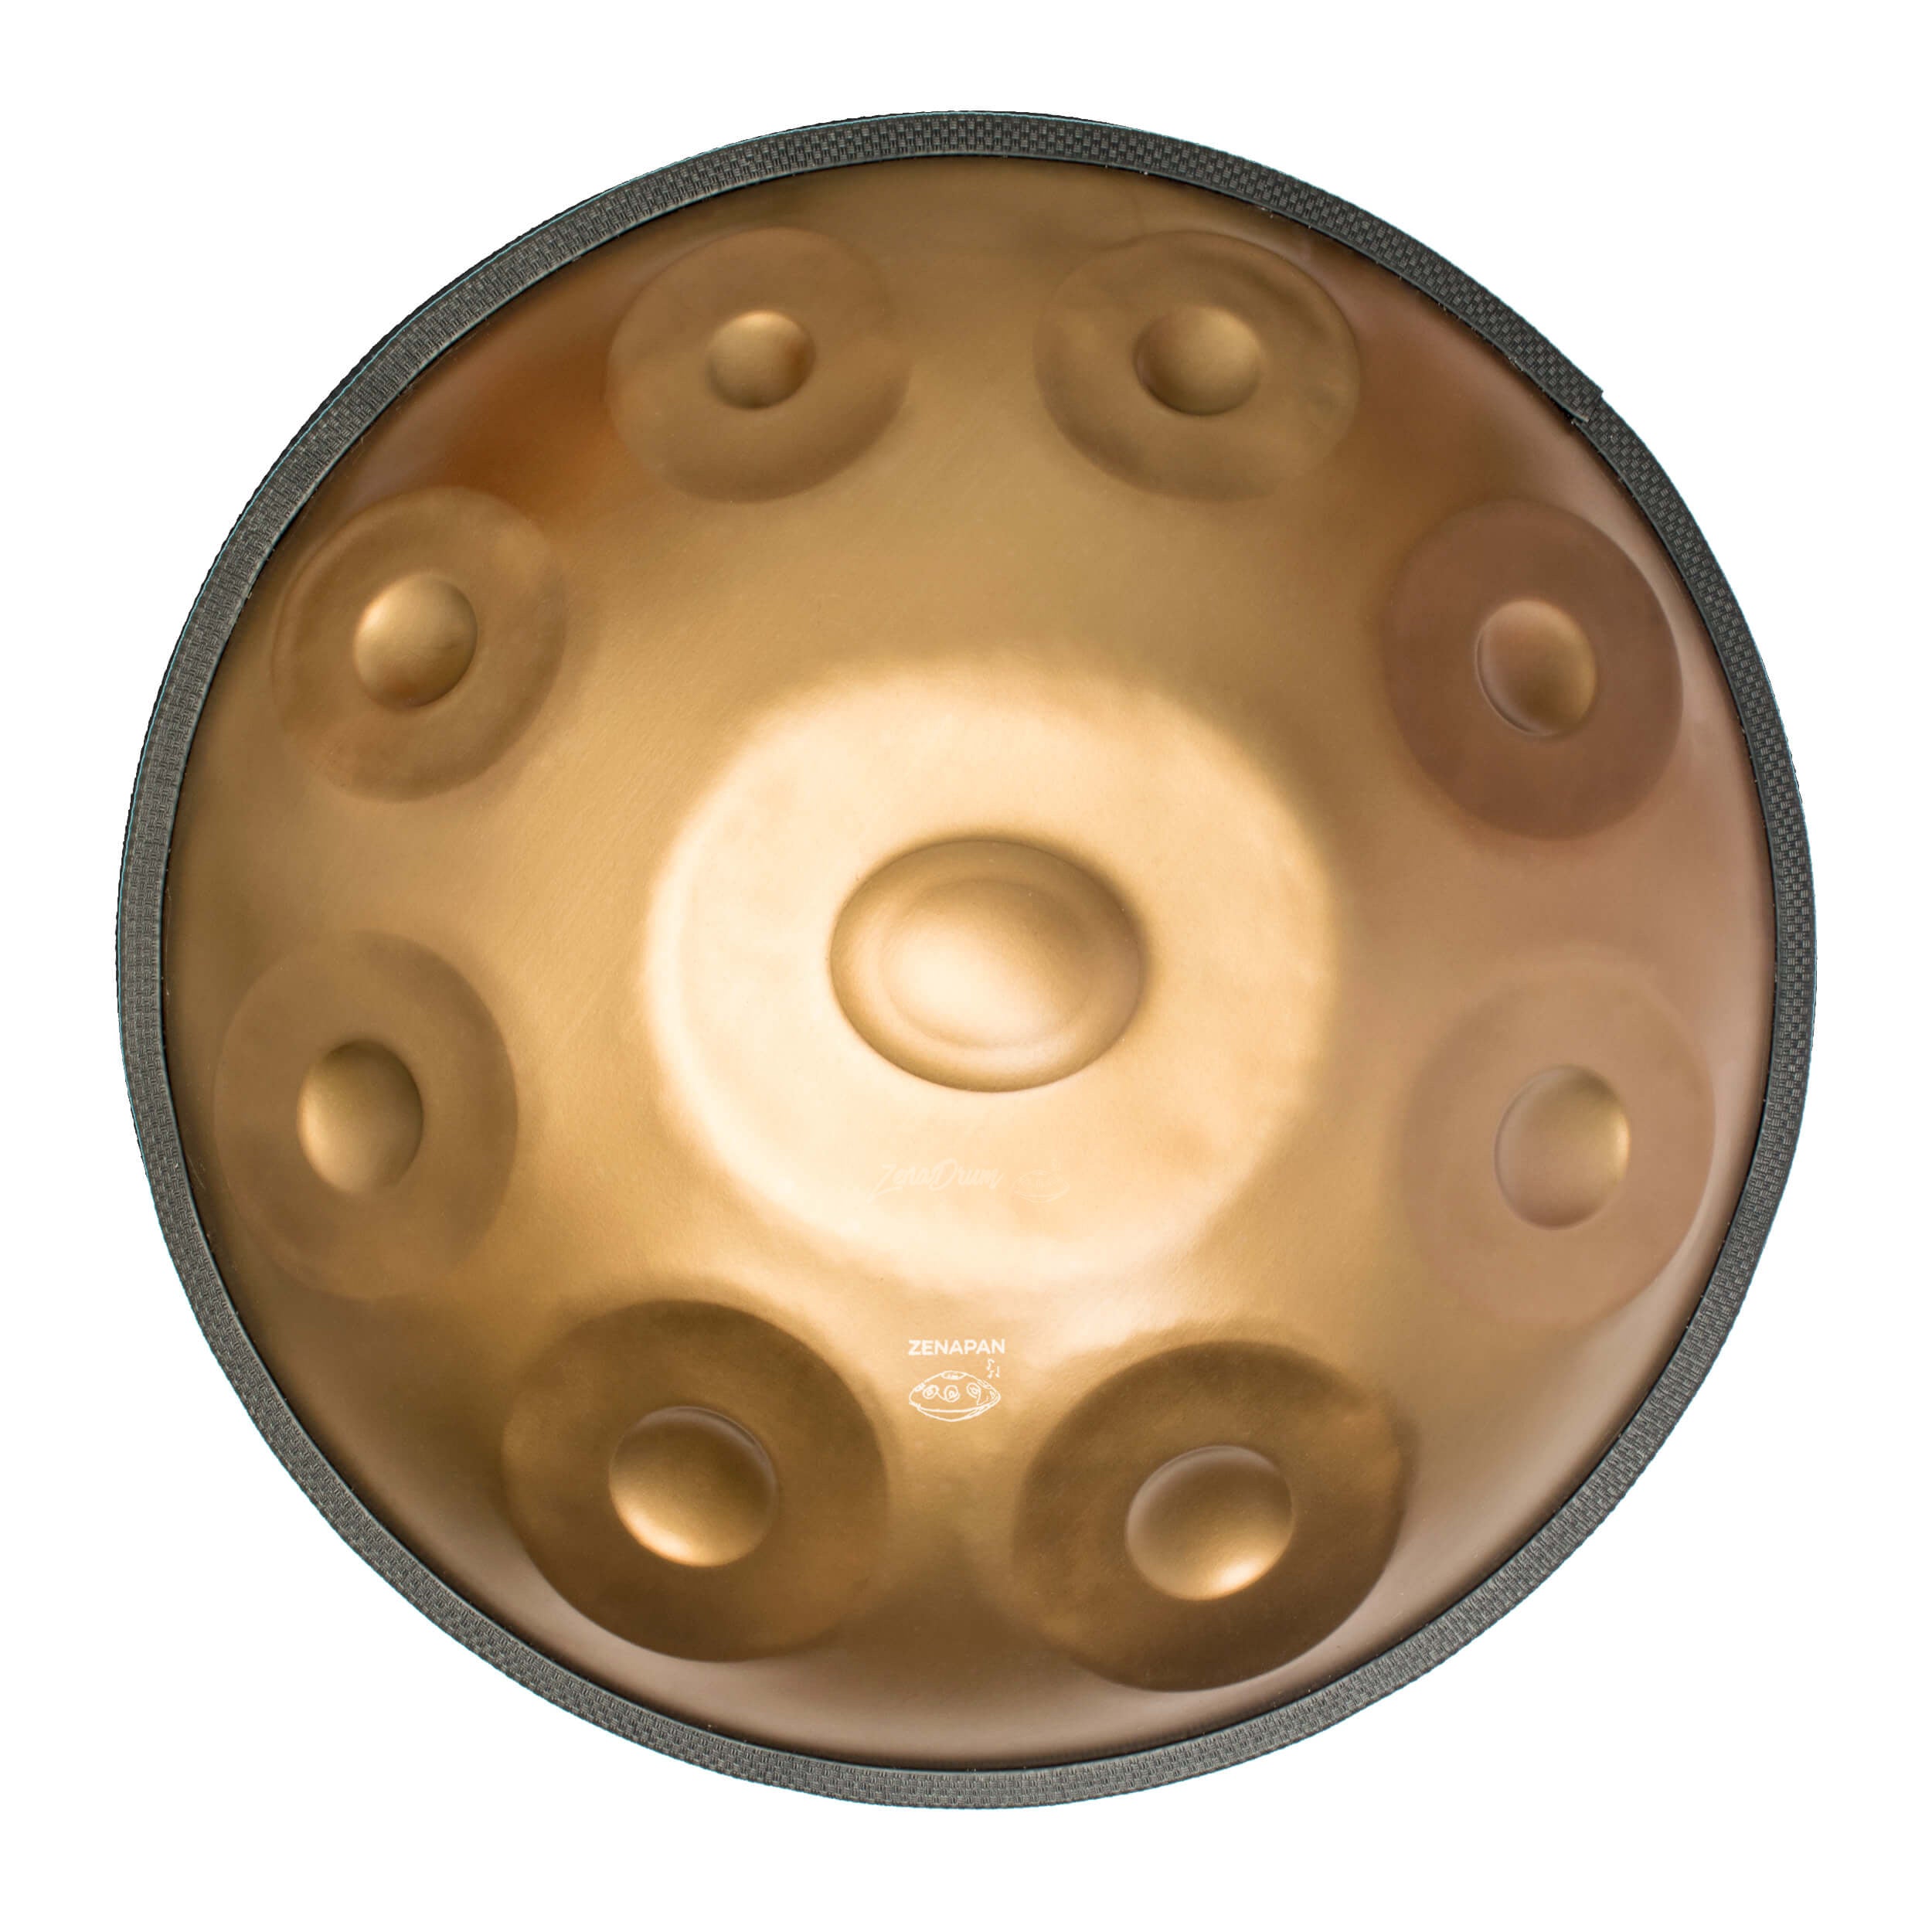 hand drum, frequency 432hz, handpan for sale, hang